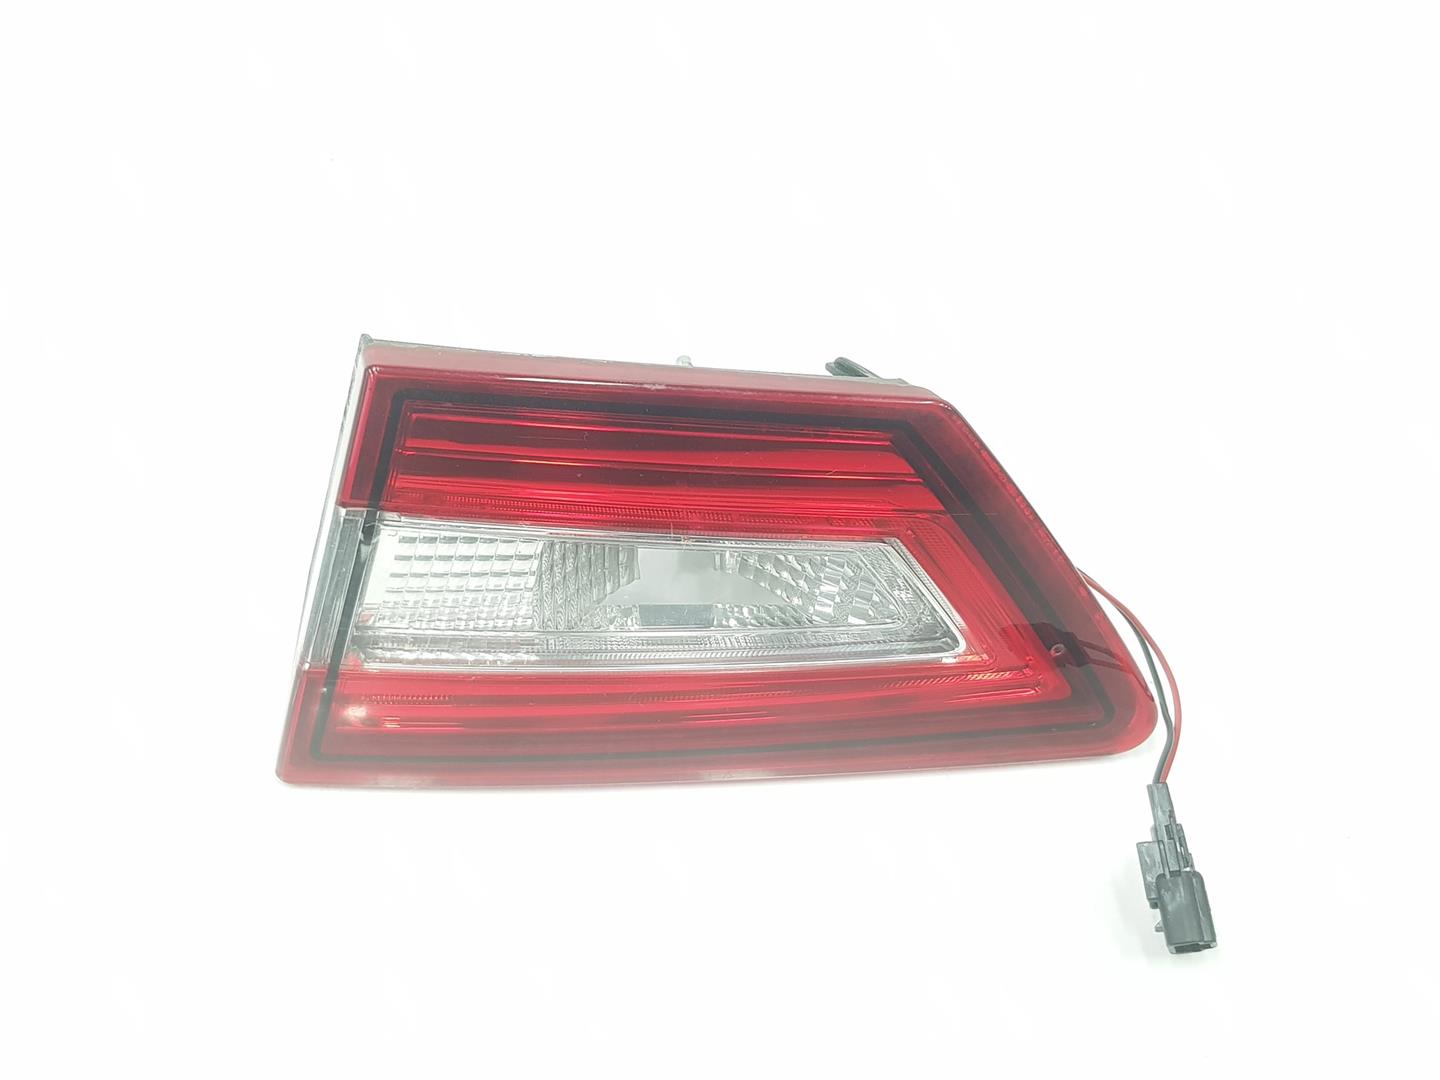 RENAULT Clio 3 generation (2005-2012) Rear Right Taillight Lamp 265505796R, 265505796R 24867376